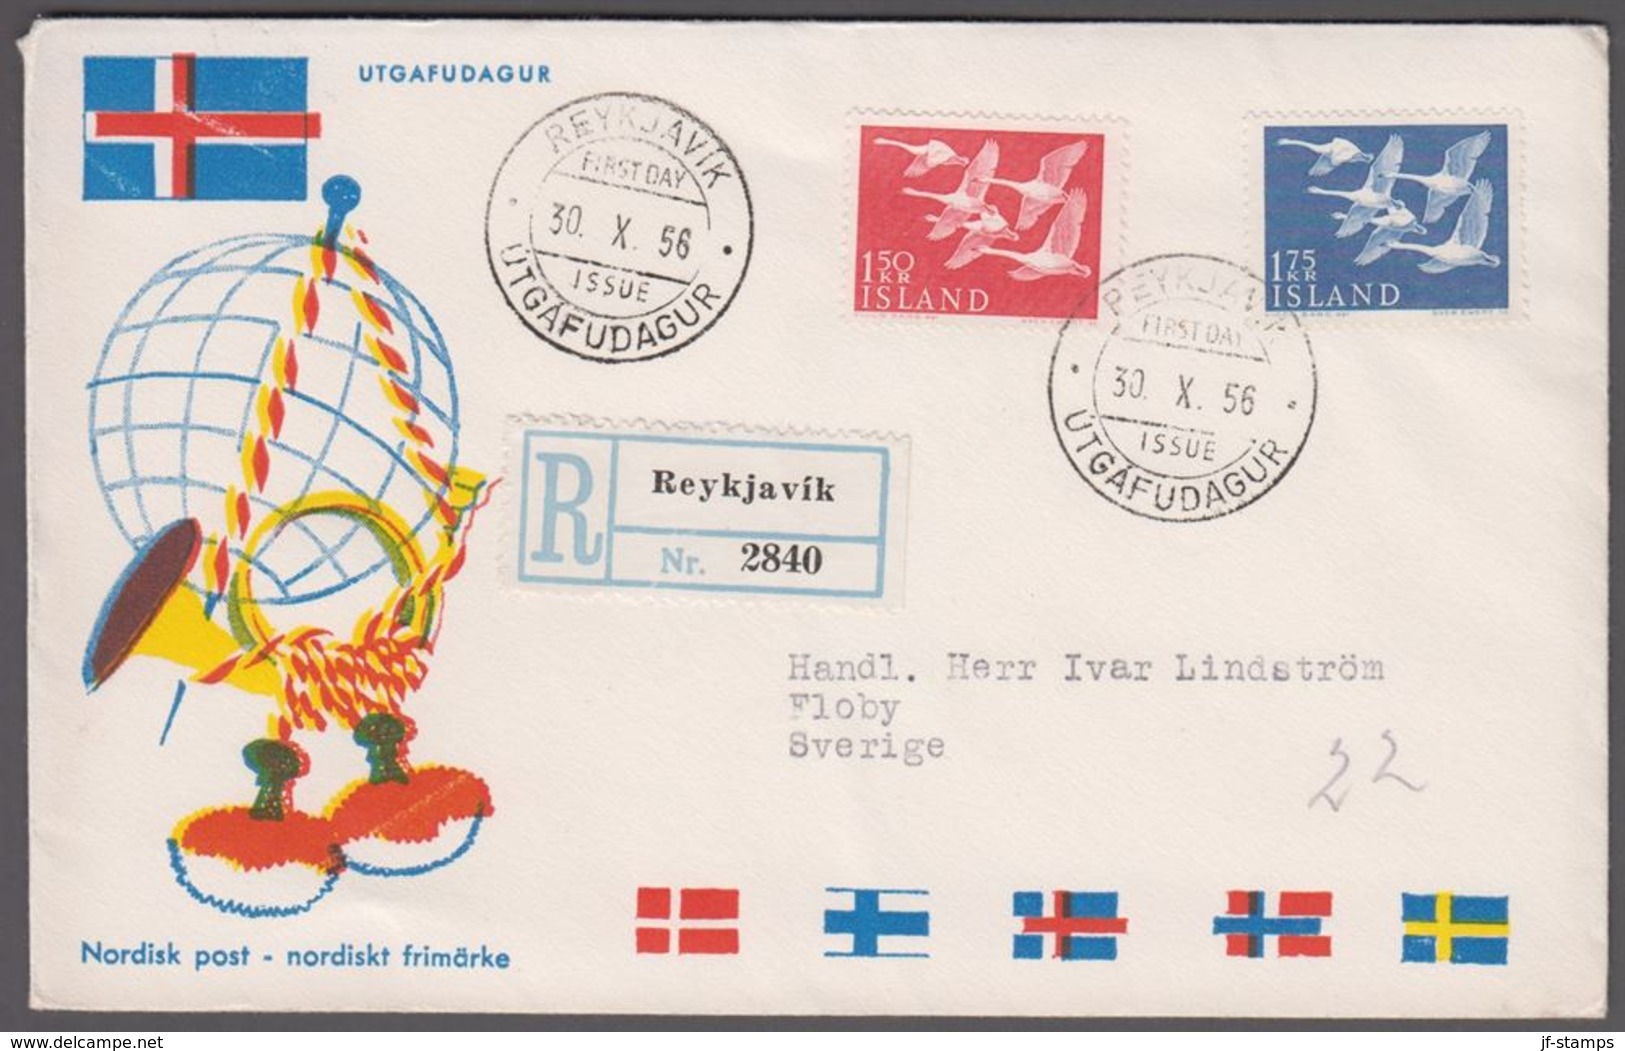 1956. NORDEN. FDC REYKJAVIK 30. X. 56.  (Michel 312-313) - JF361942 - Covers & Documents